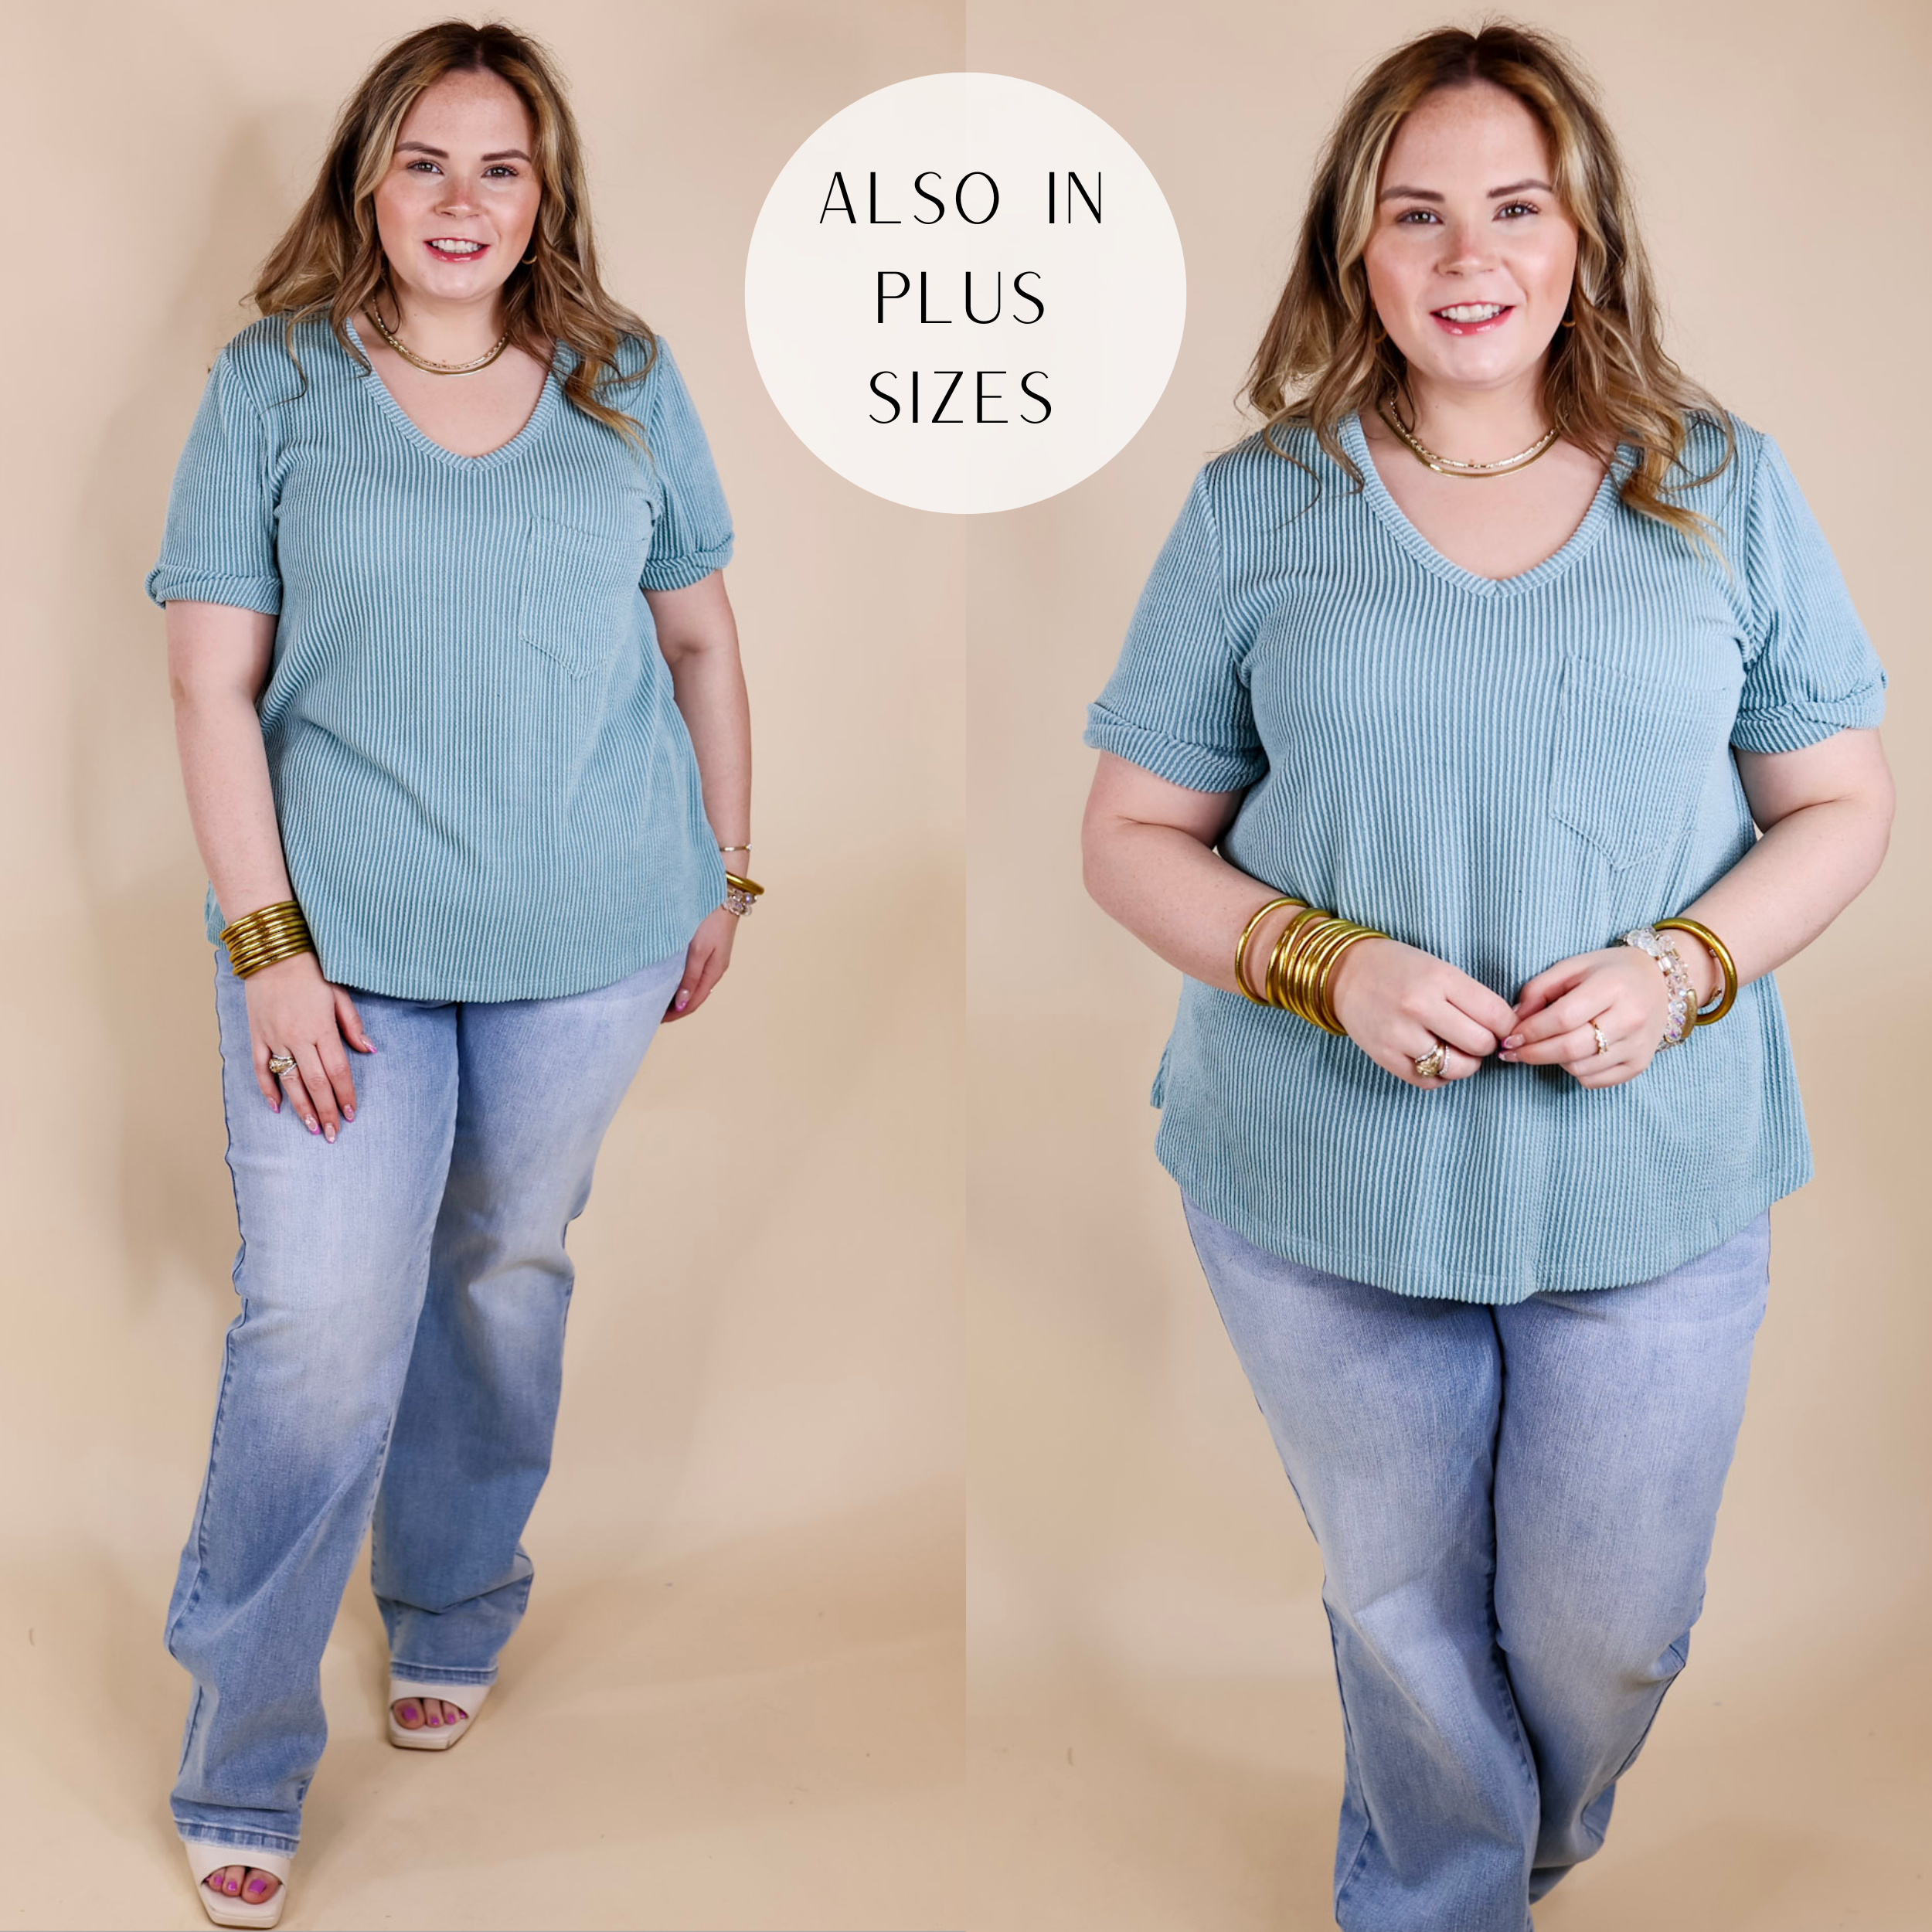 Model is wearing a short sleeve ribbed top with a v neckline and chest pocket. Model has this top paired with light wash jeans, white heels, and gold jewelry.